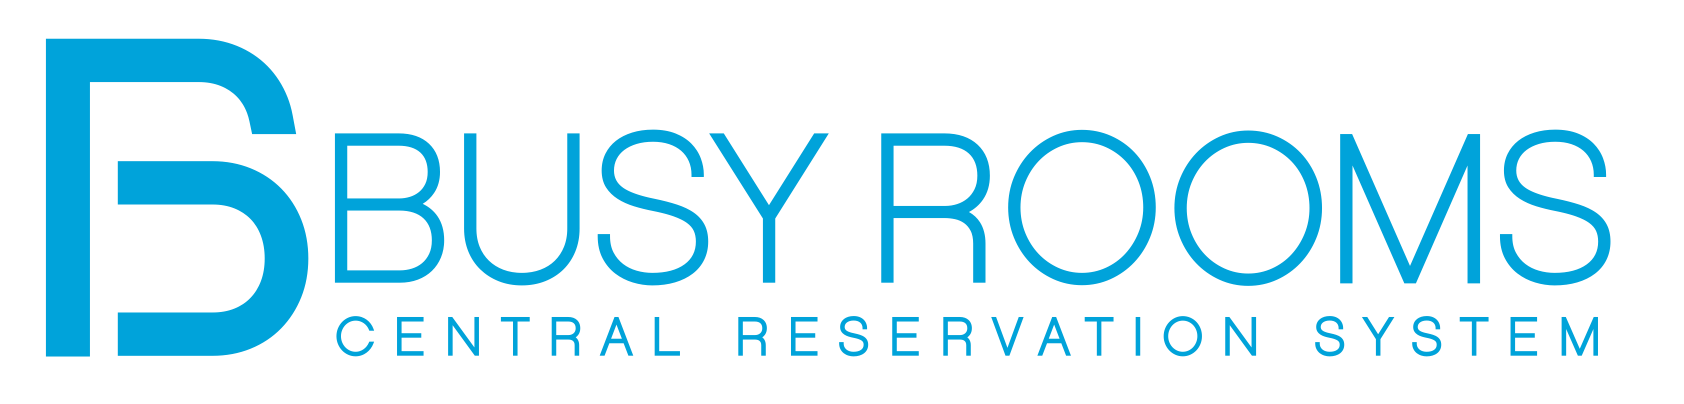 Busy Rooms logo in light blue, with the same colour font and capital letters. Underneath the brand name, the words "Central Reservation System" are also shown